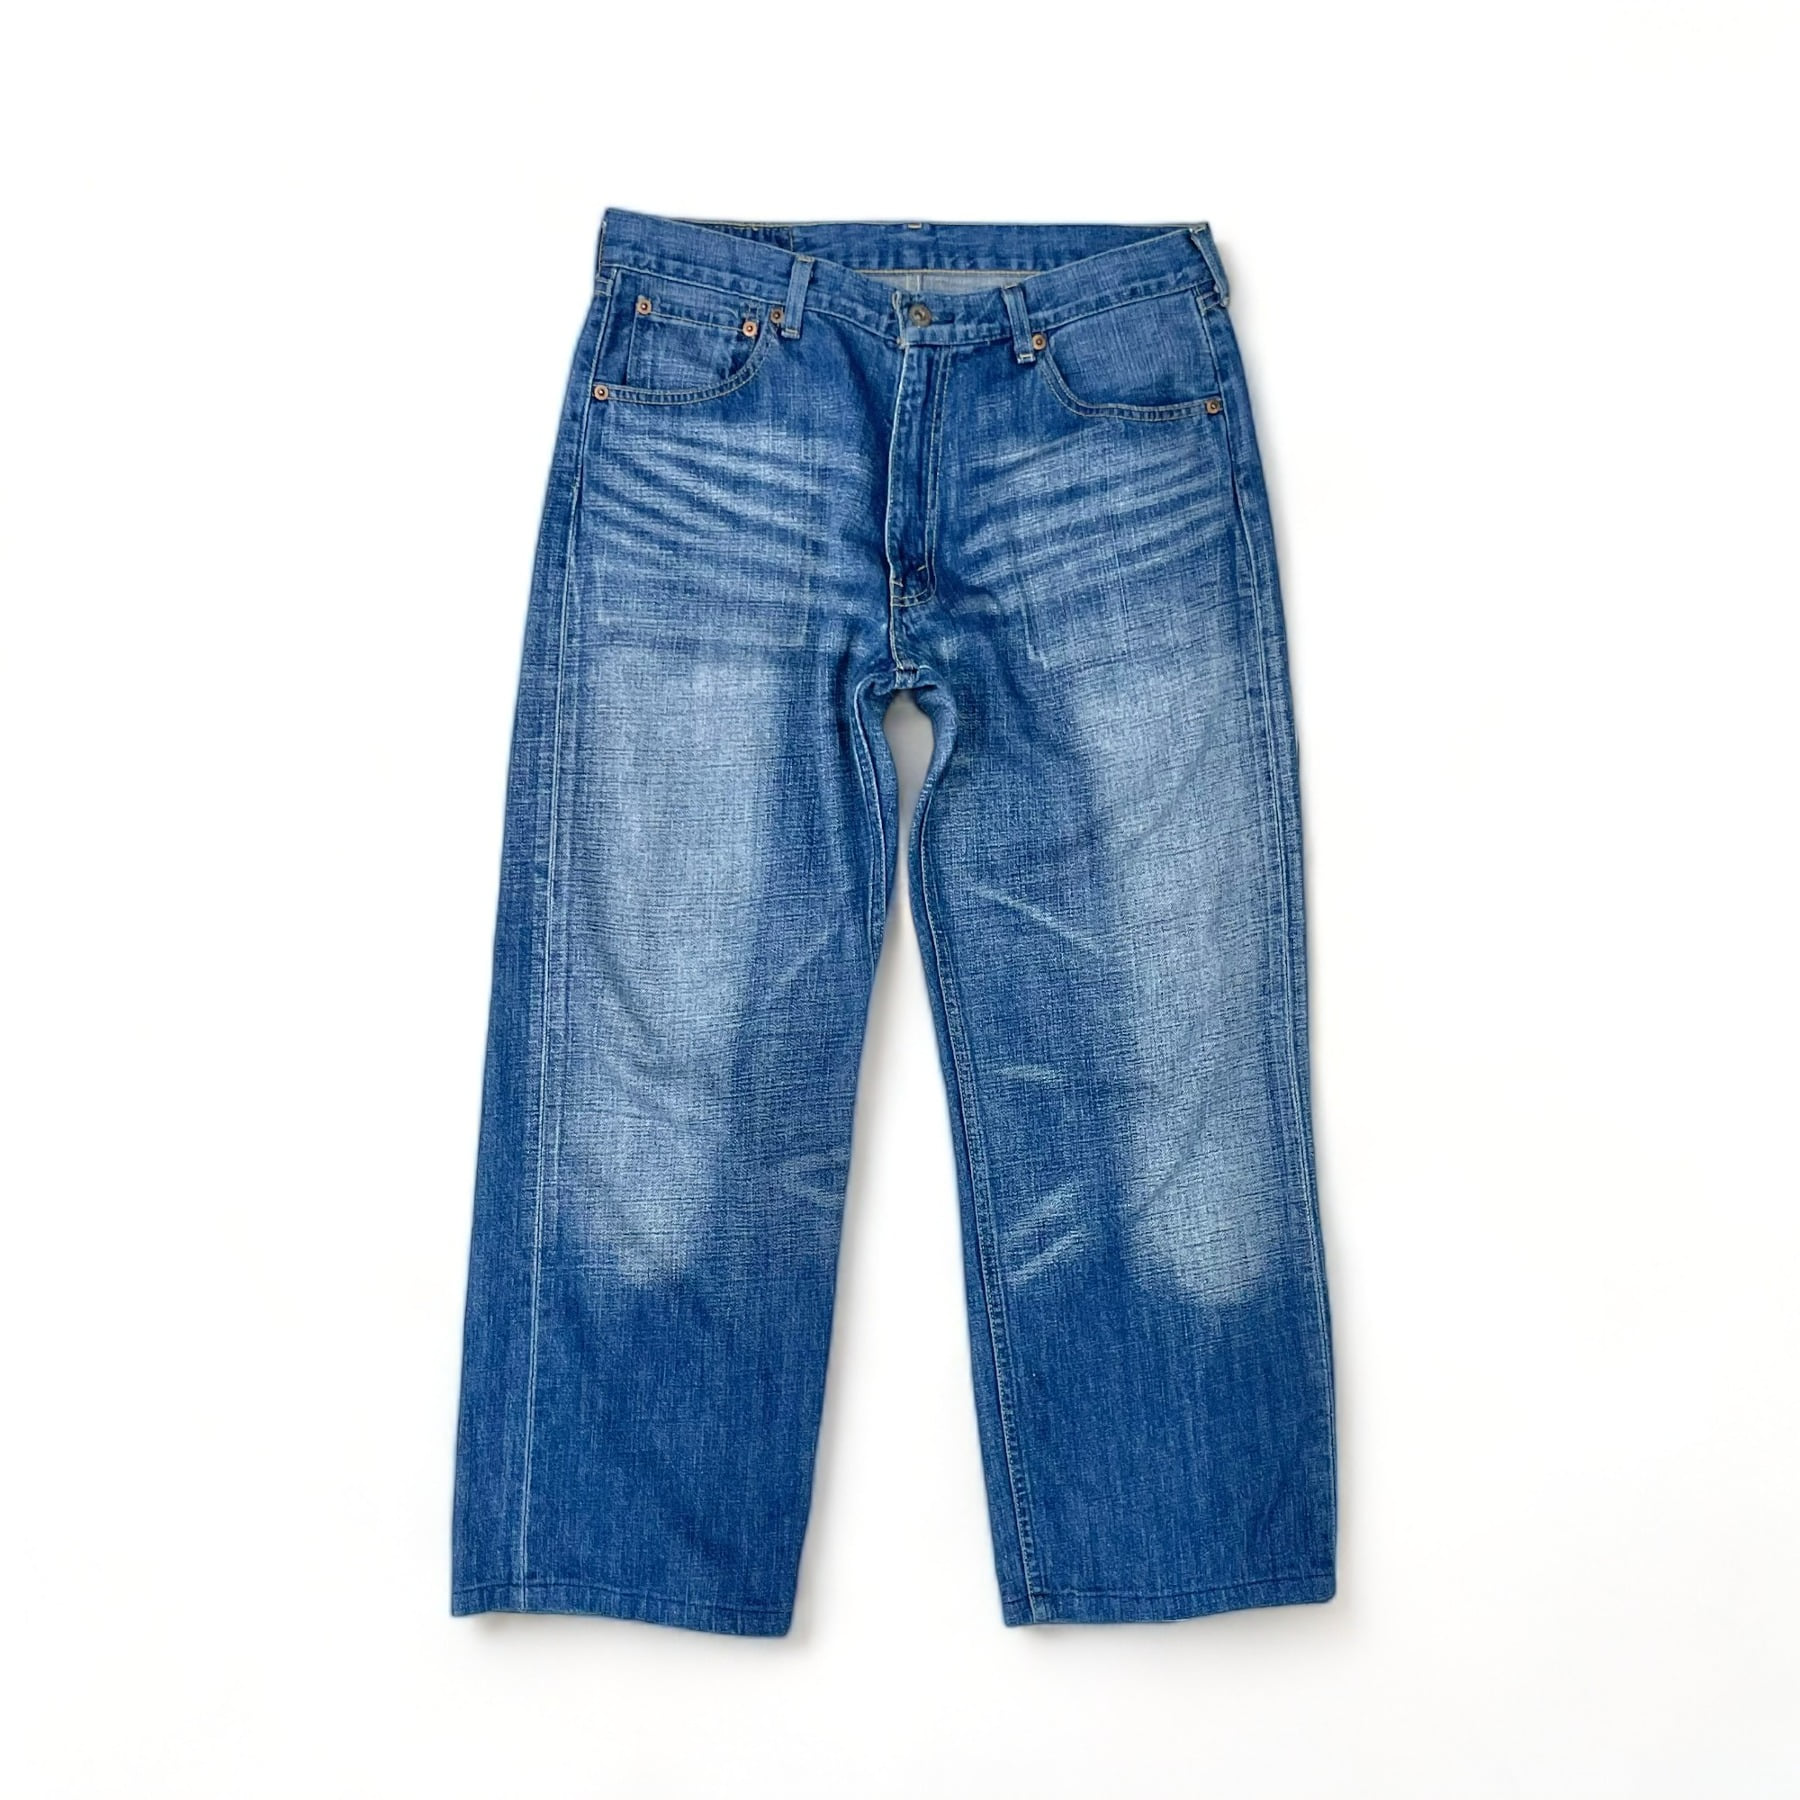 00&#039;s Levis 503 (Made in JAPAN) - 33inch